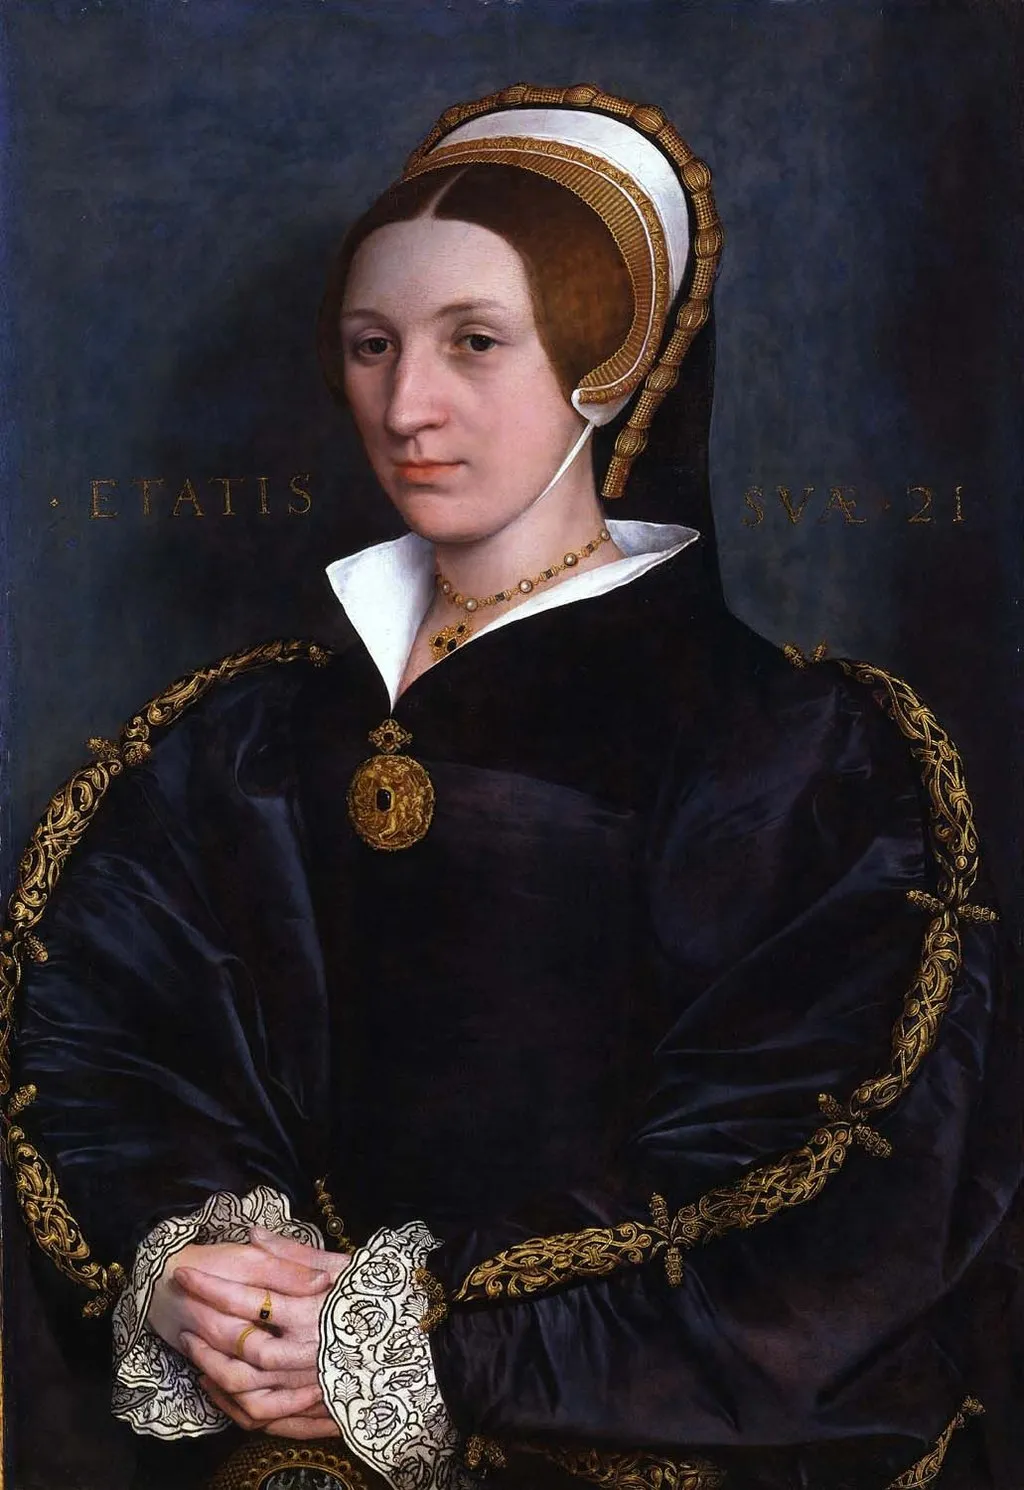 A Hans Holbein portrait previously identified as a likeness of Catherine Howard but now thought to depict a member of the Cromwell family